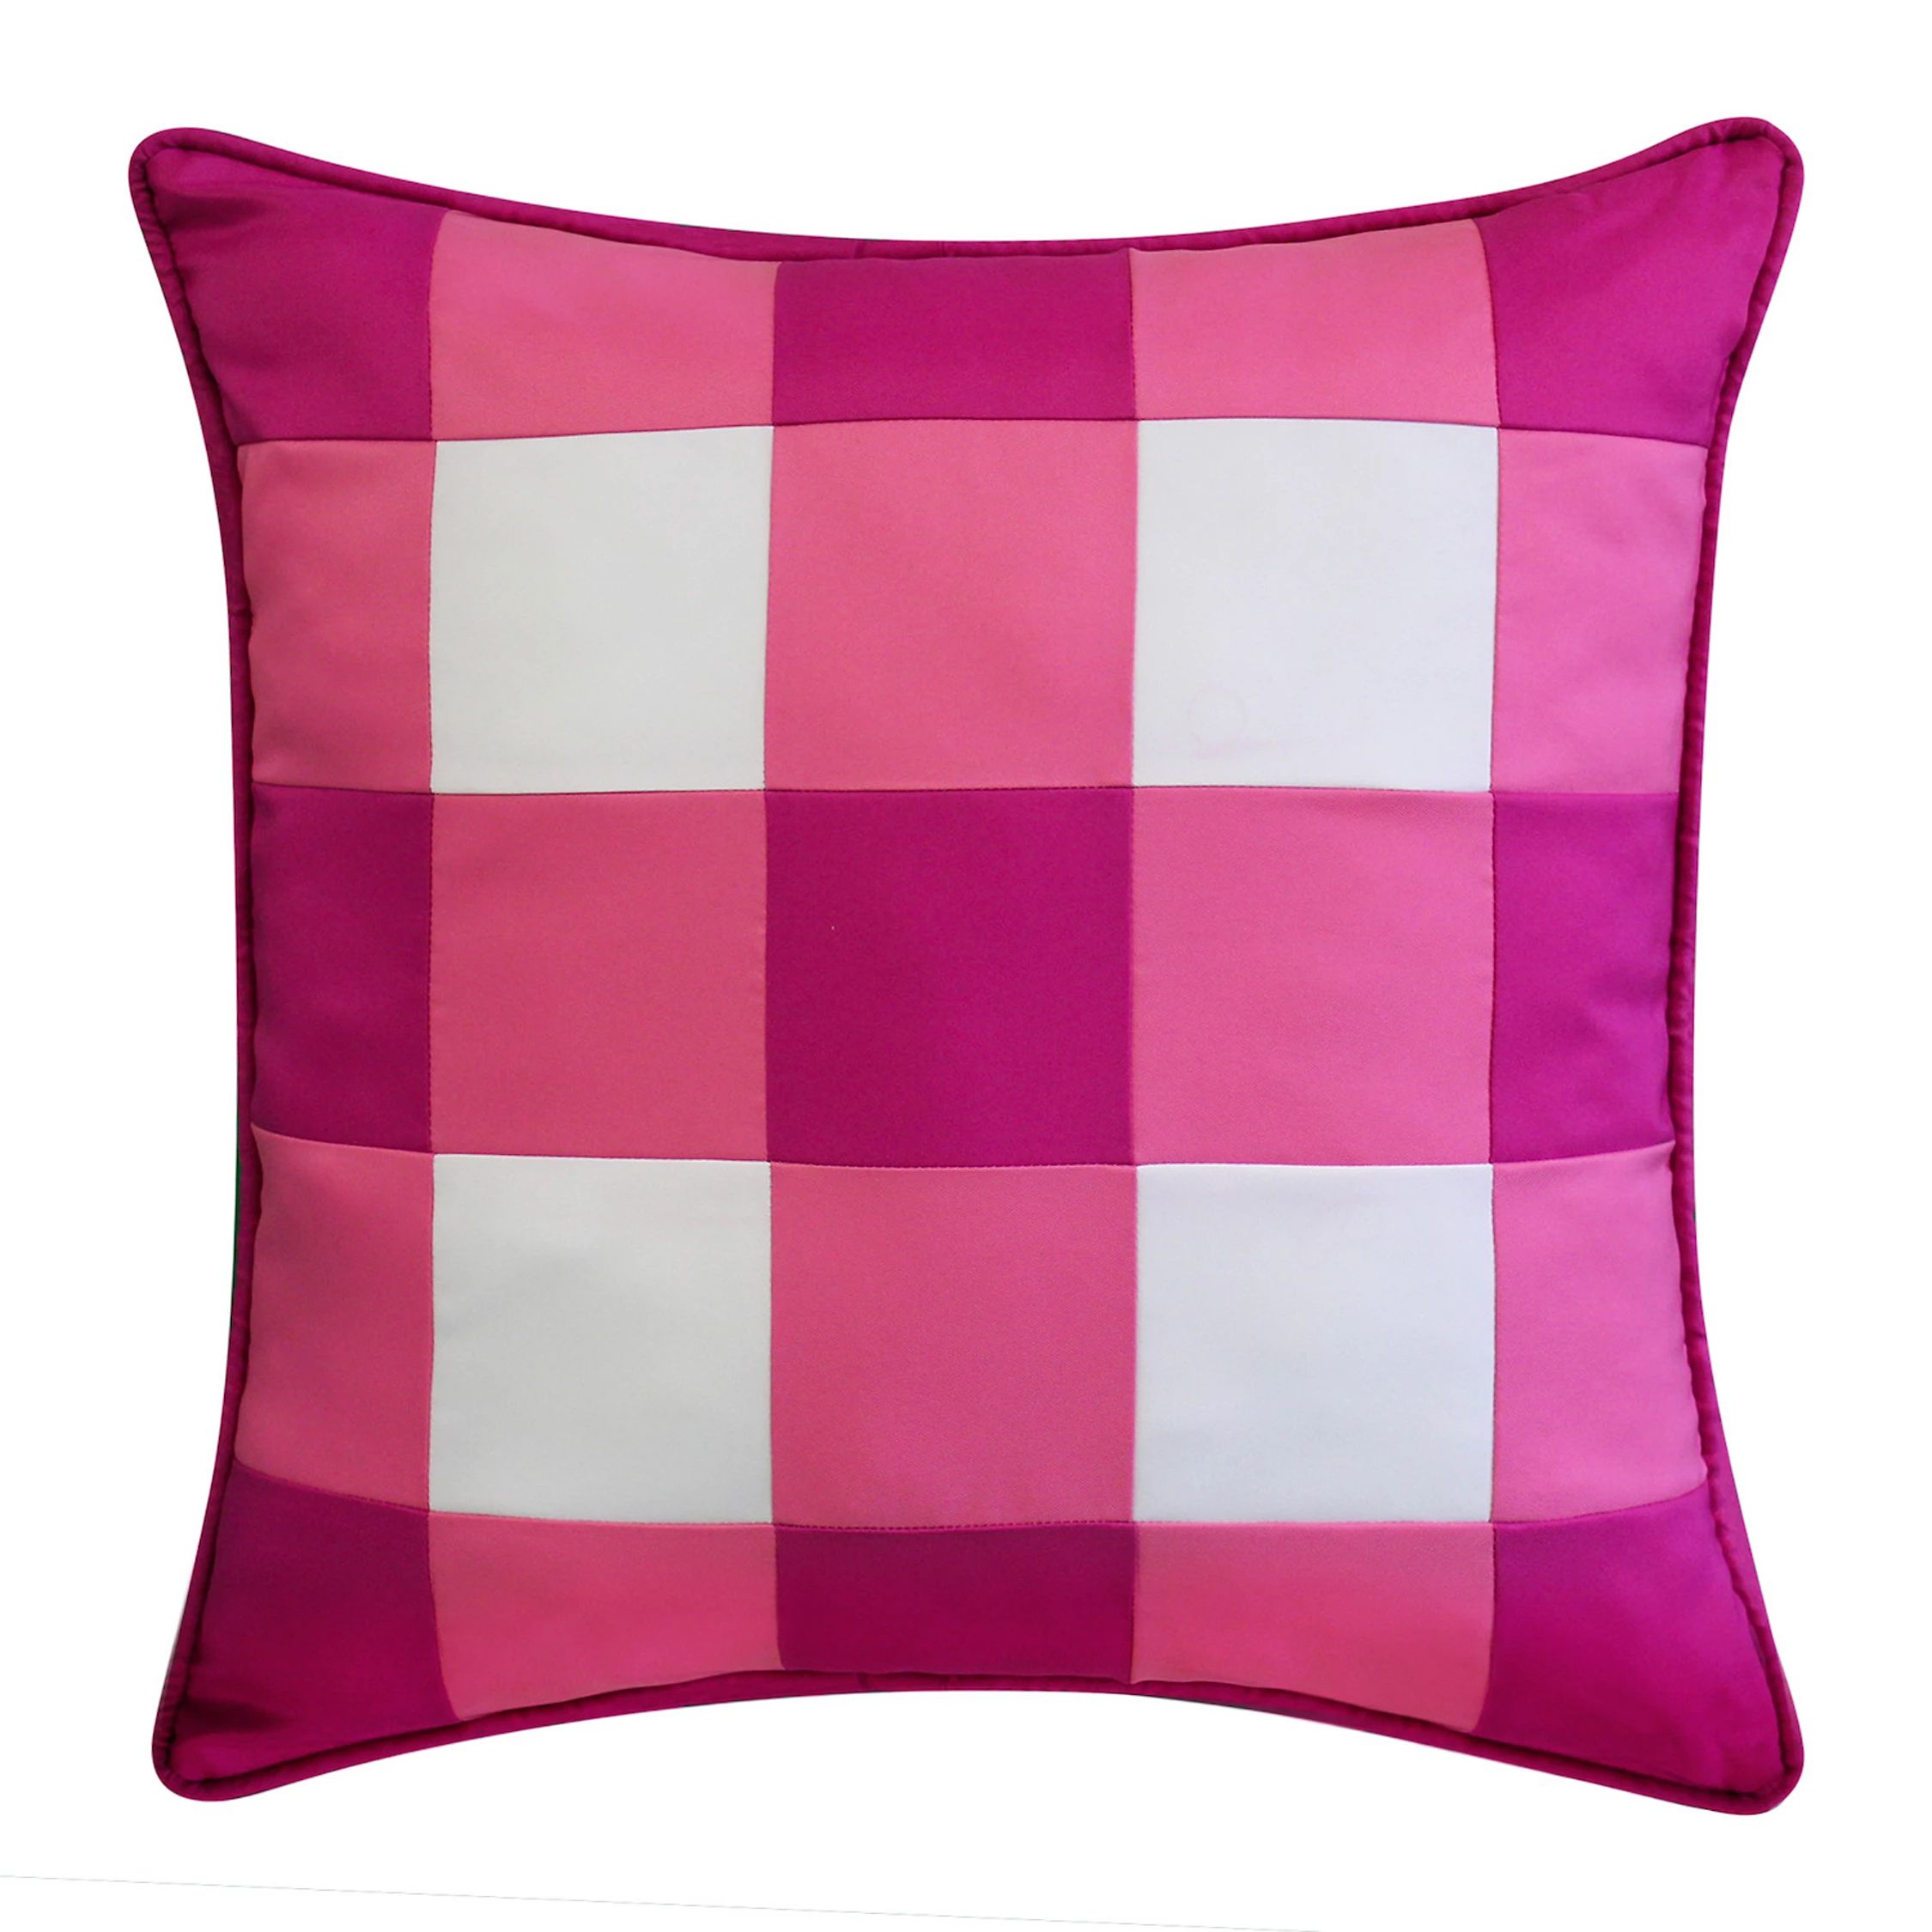 Edie@Home Outdoor Gingham Decorative Throw Pillow | Kohl's